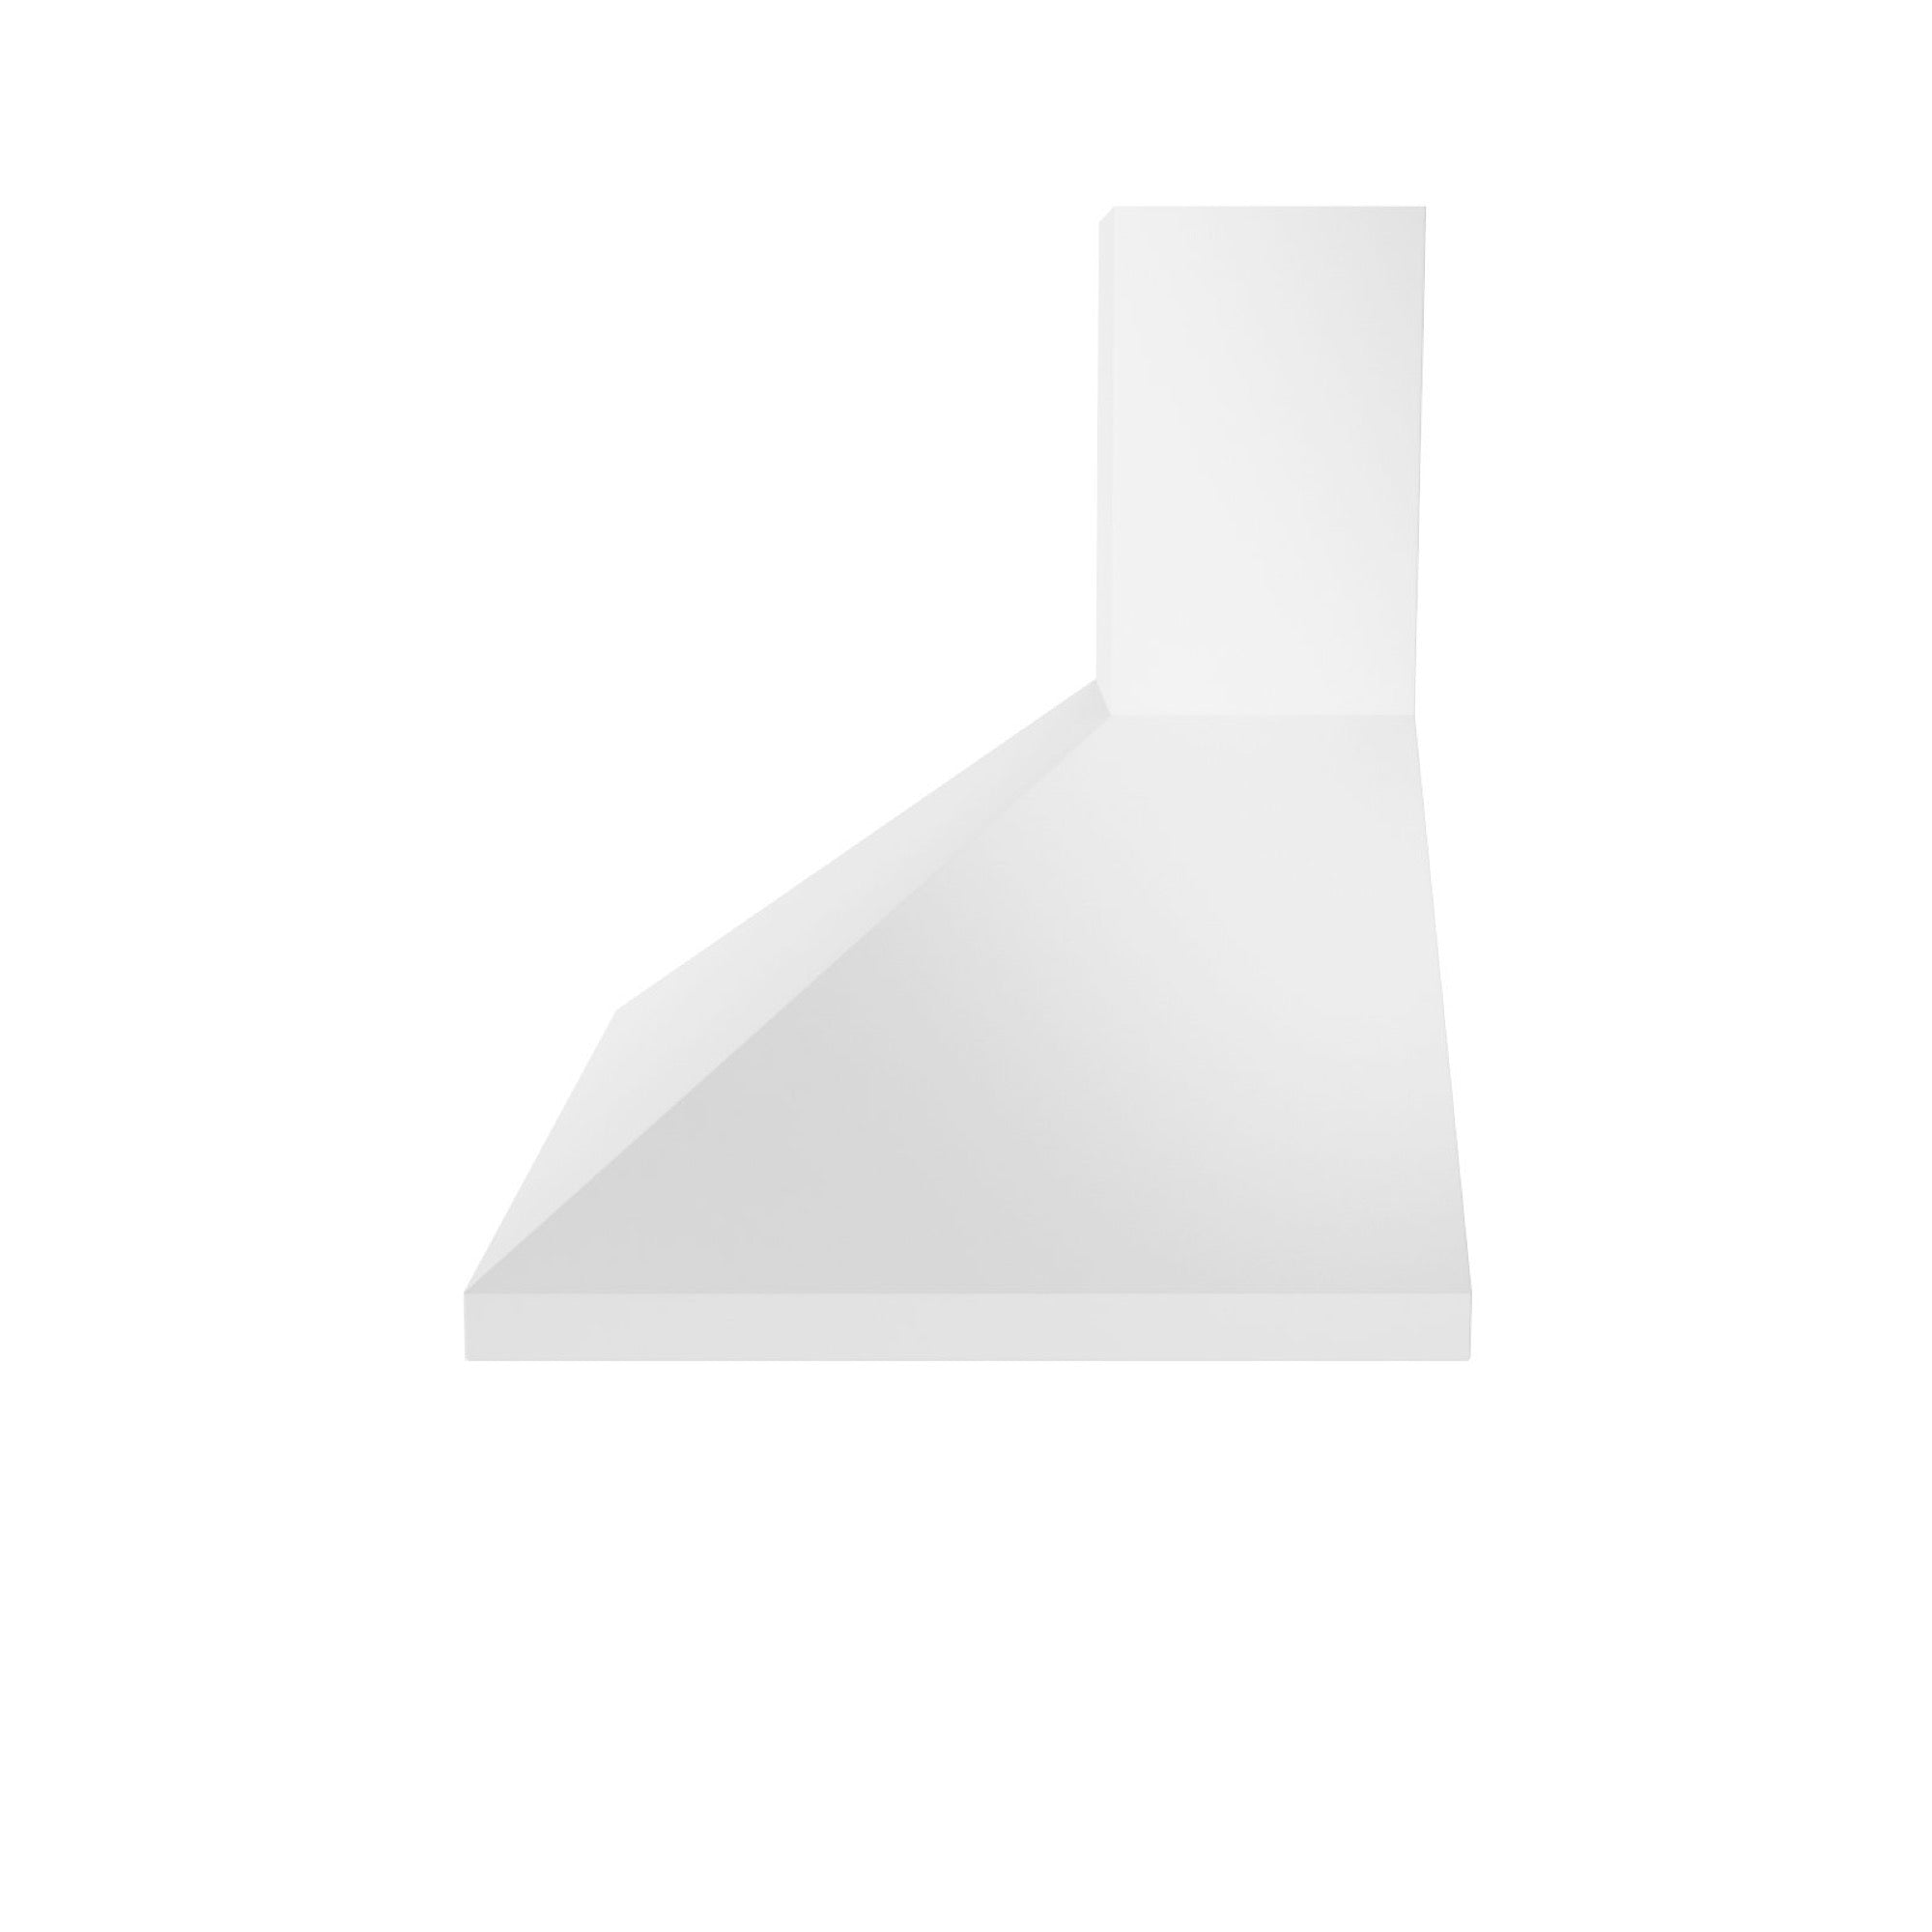 WPPW430 30 in. Wall-Mounted Convertible Range Hood in White